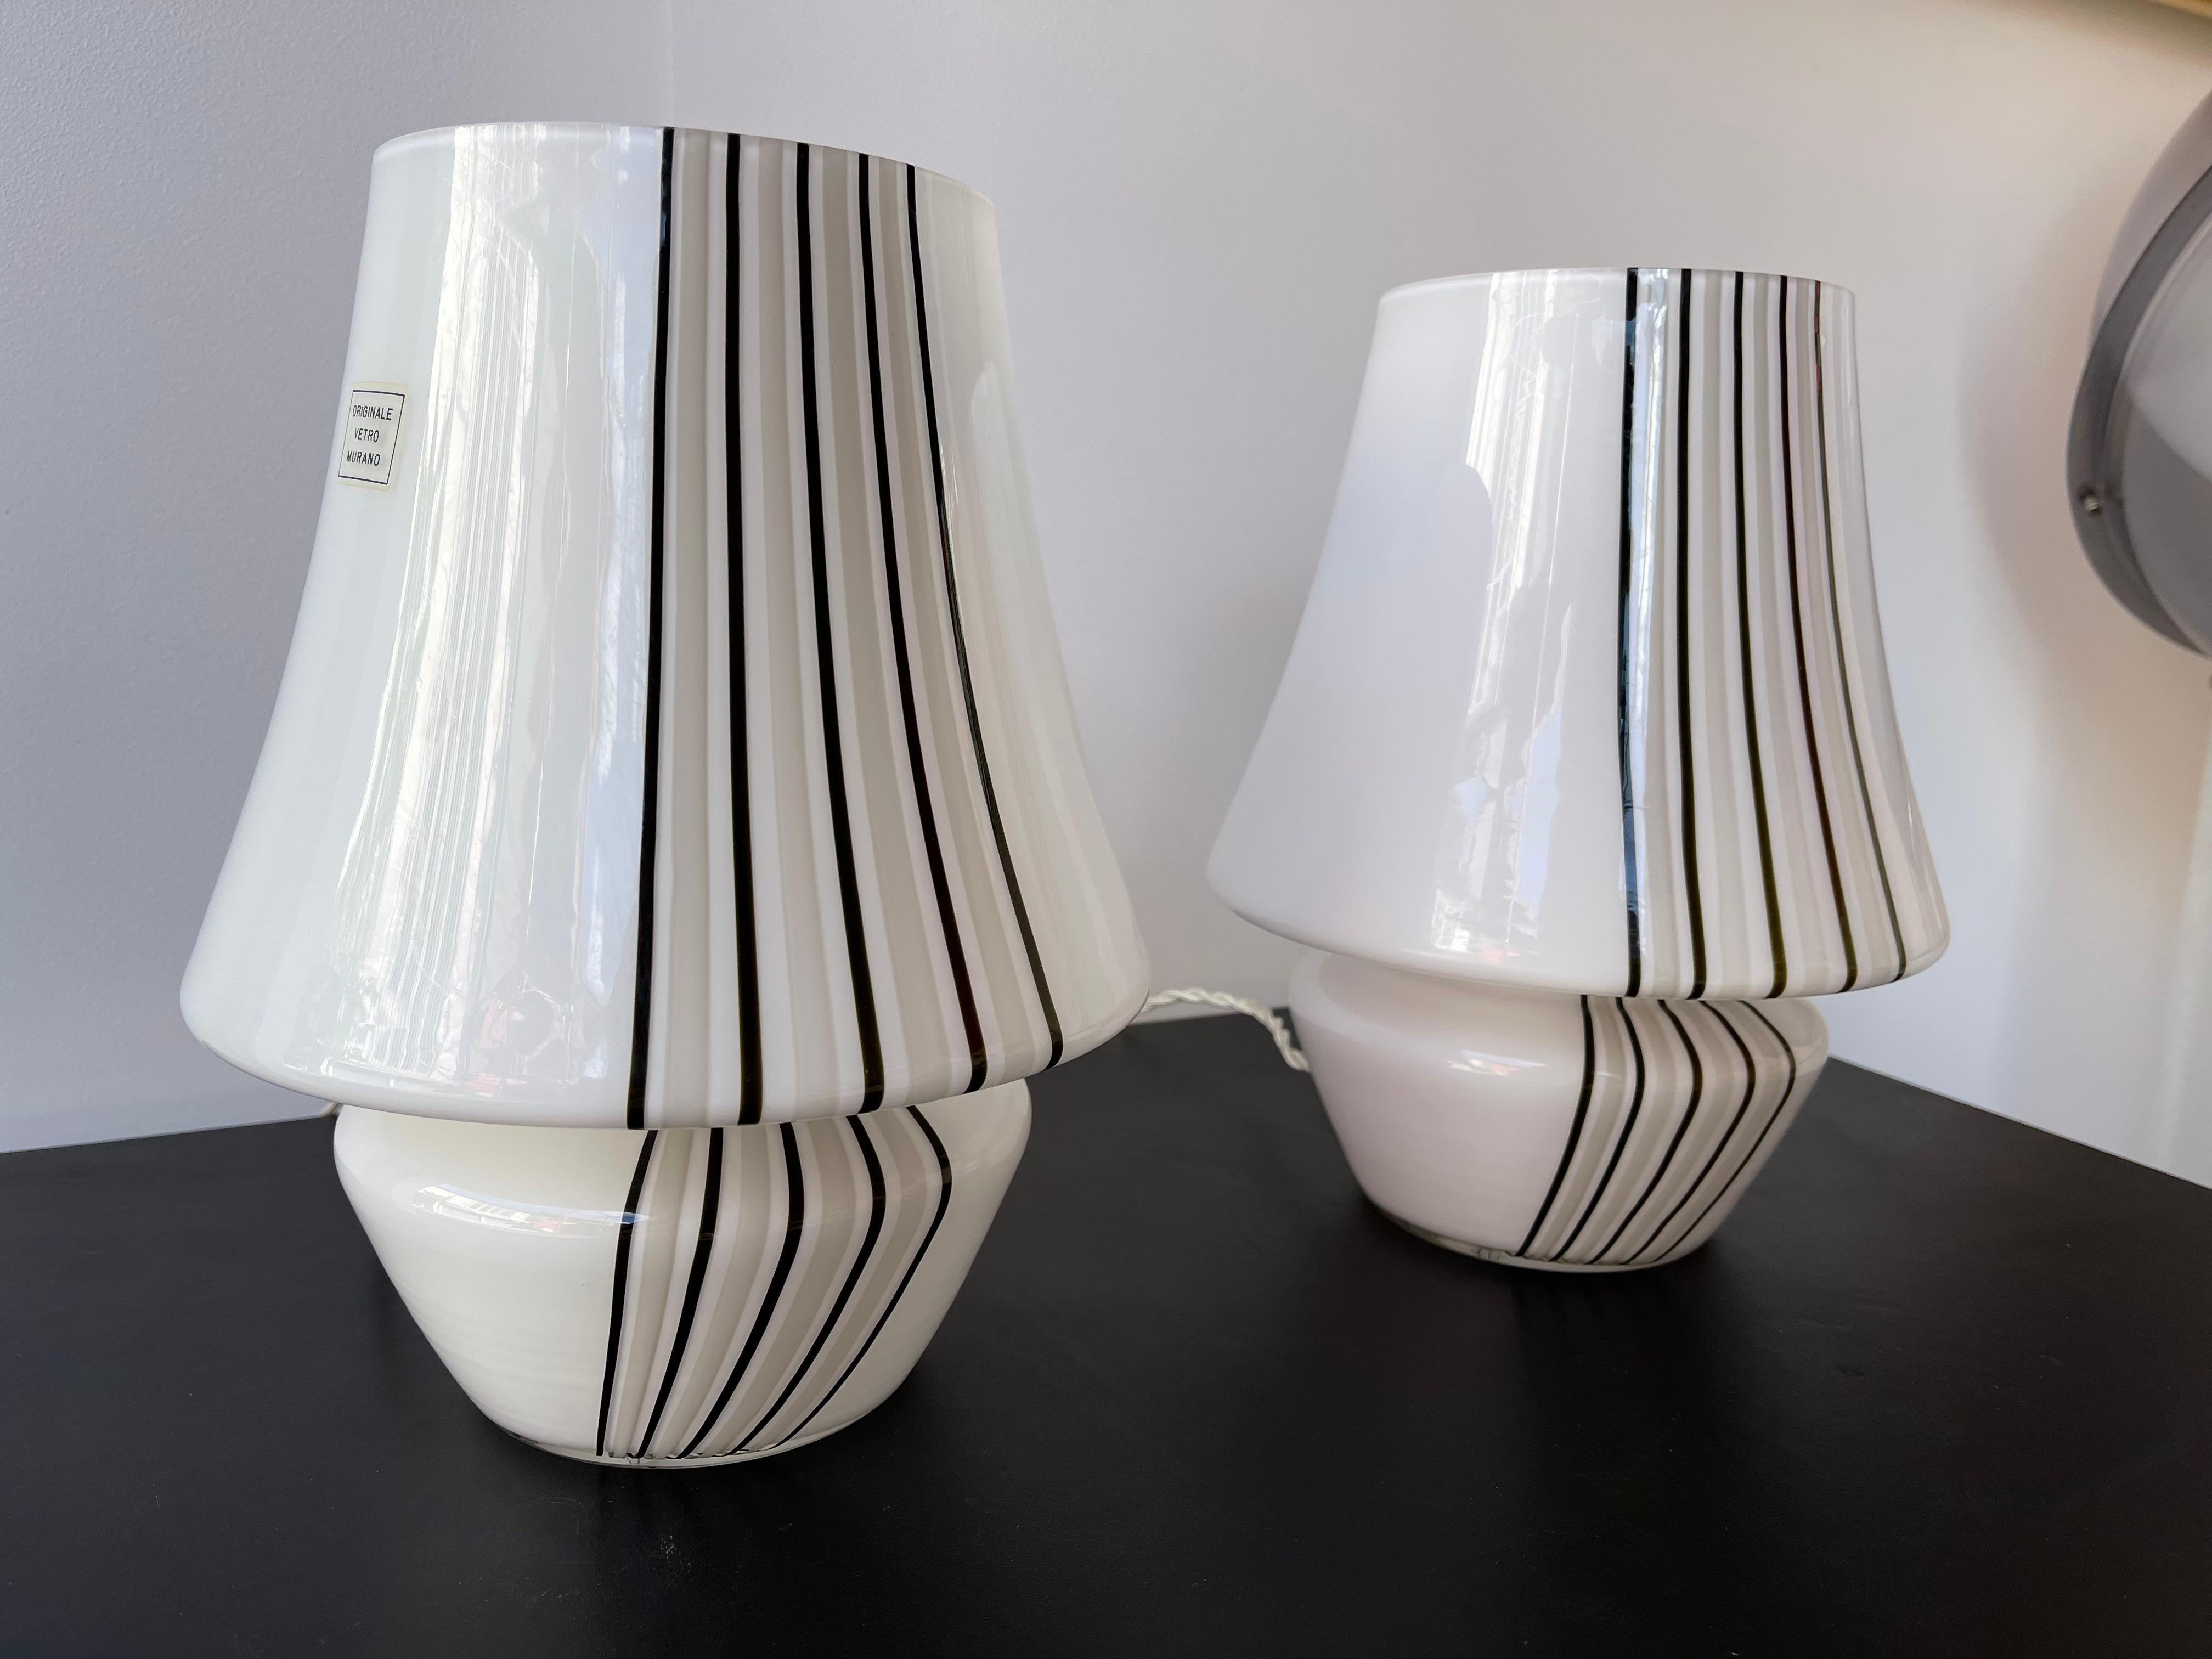 Pair of Stripe Murano Glass Lamps, Italy, 1970s For Sale 2